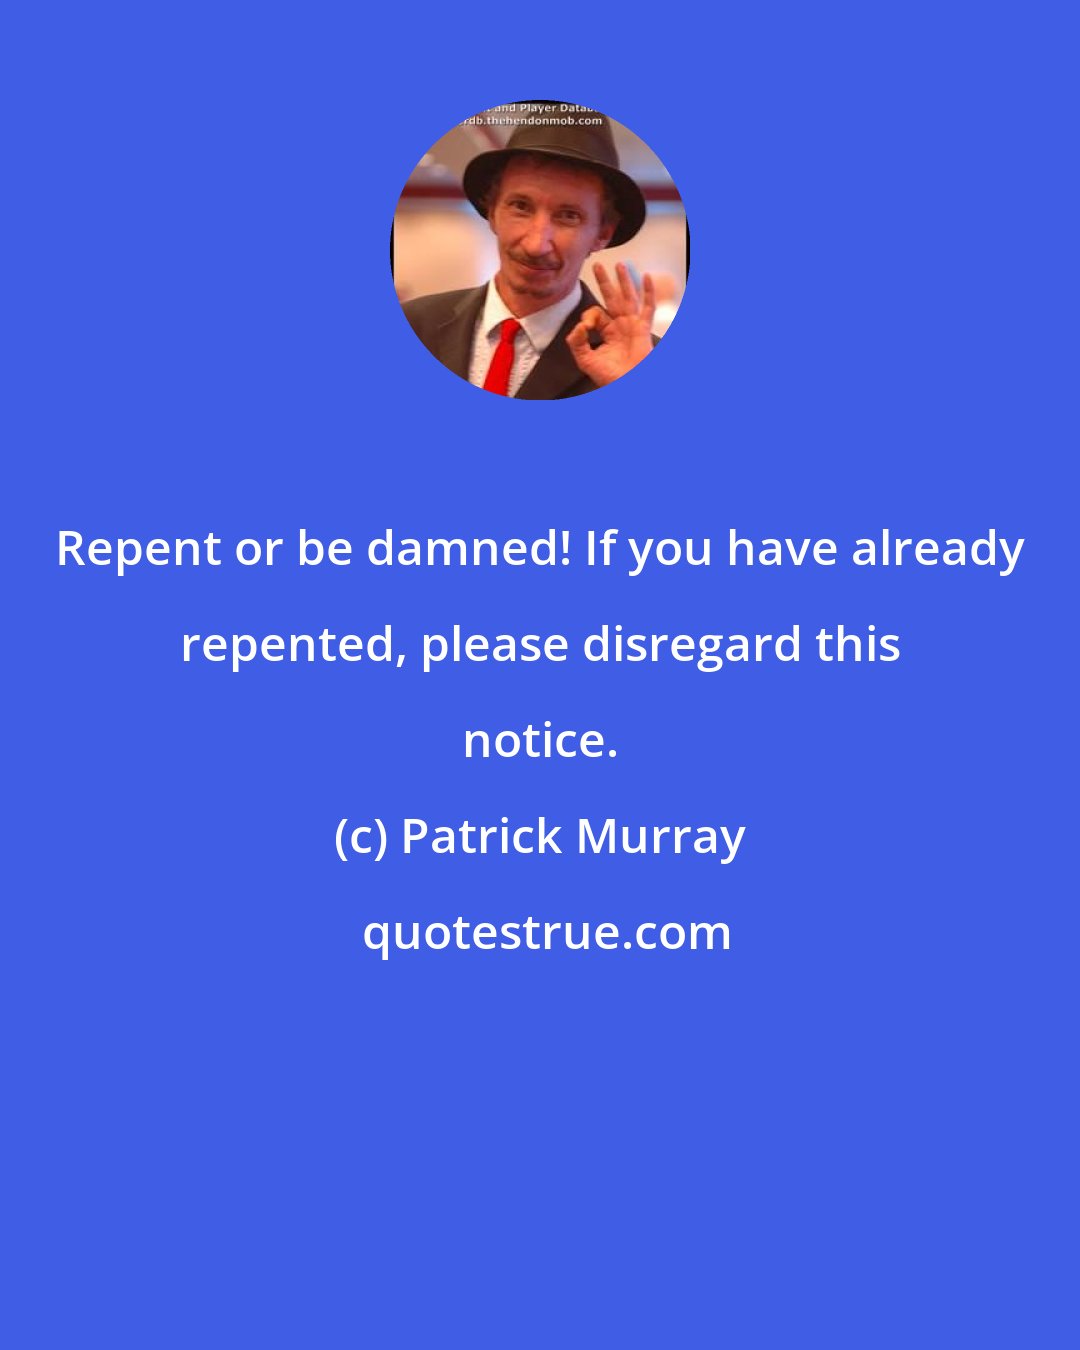 Patrick Murray: Repent or be damned! If you have already repented, please disregard this notice.